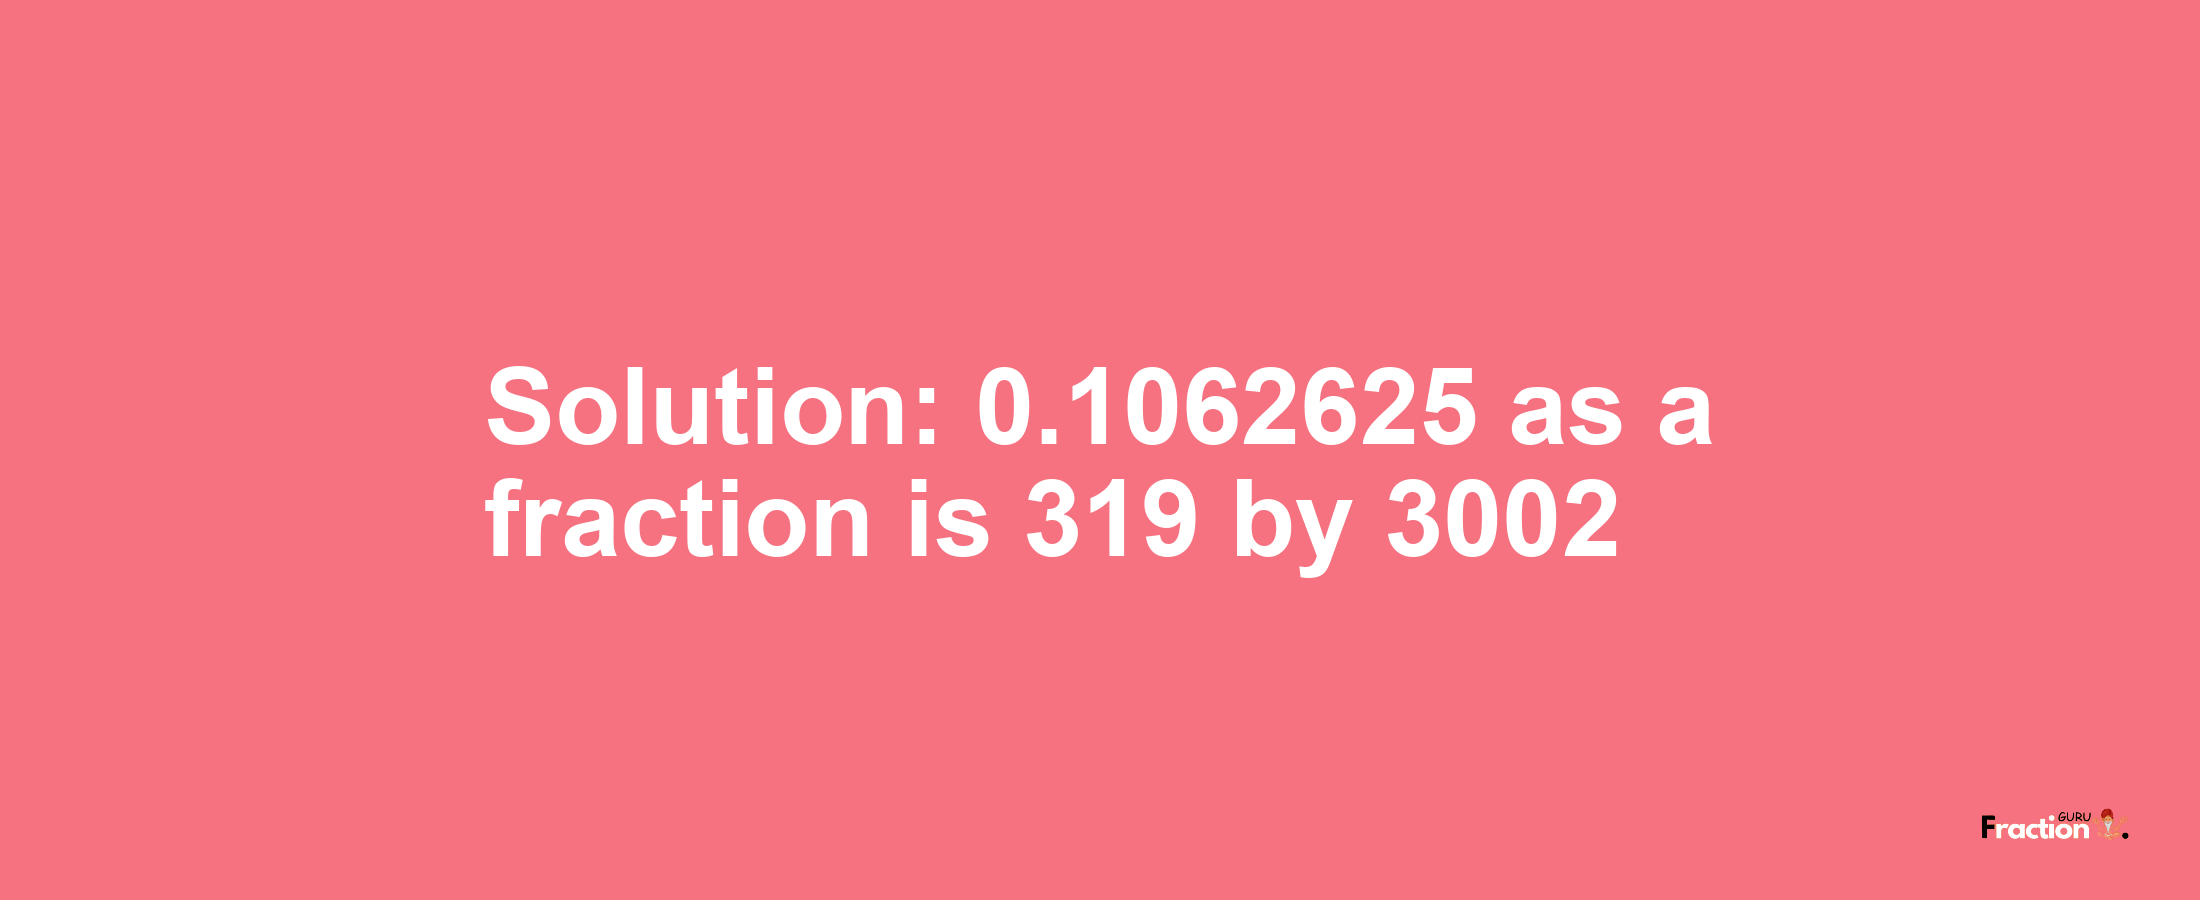 Solution:0.1062625 as a fraction is 319/3002